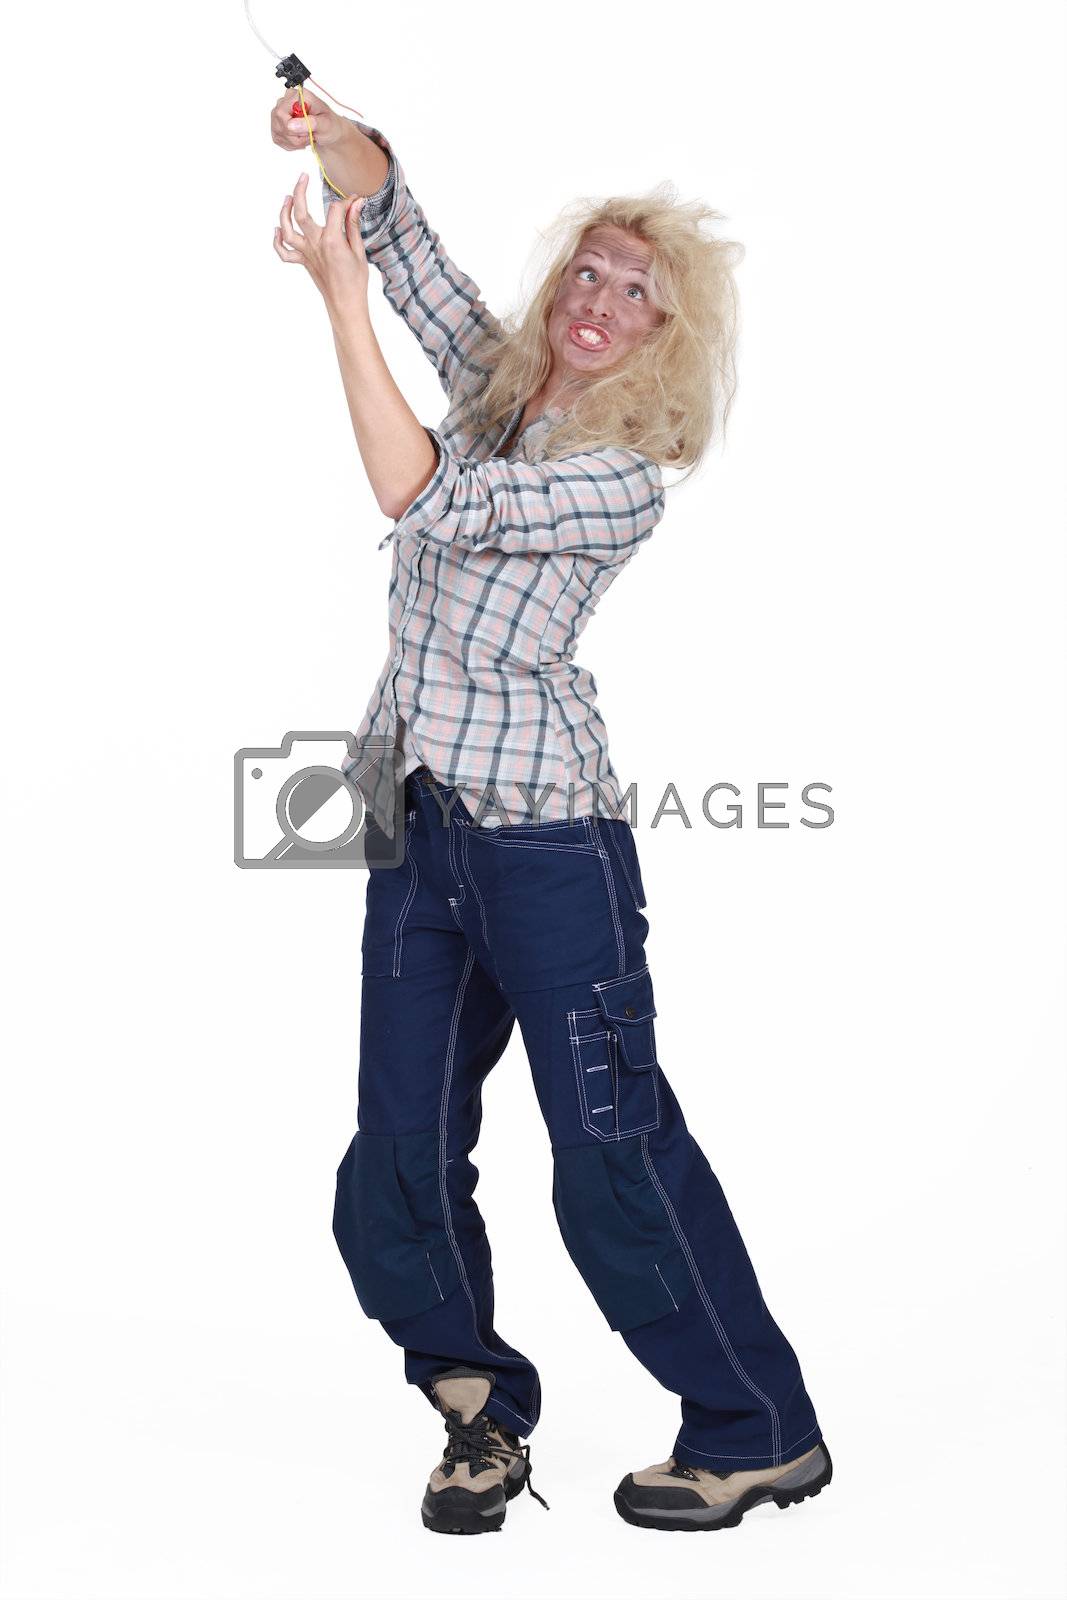 Royalty free image of Electrocuted woman by phovoir